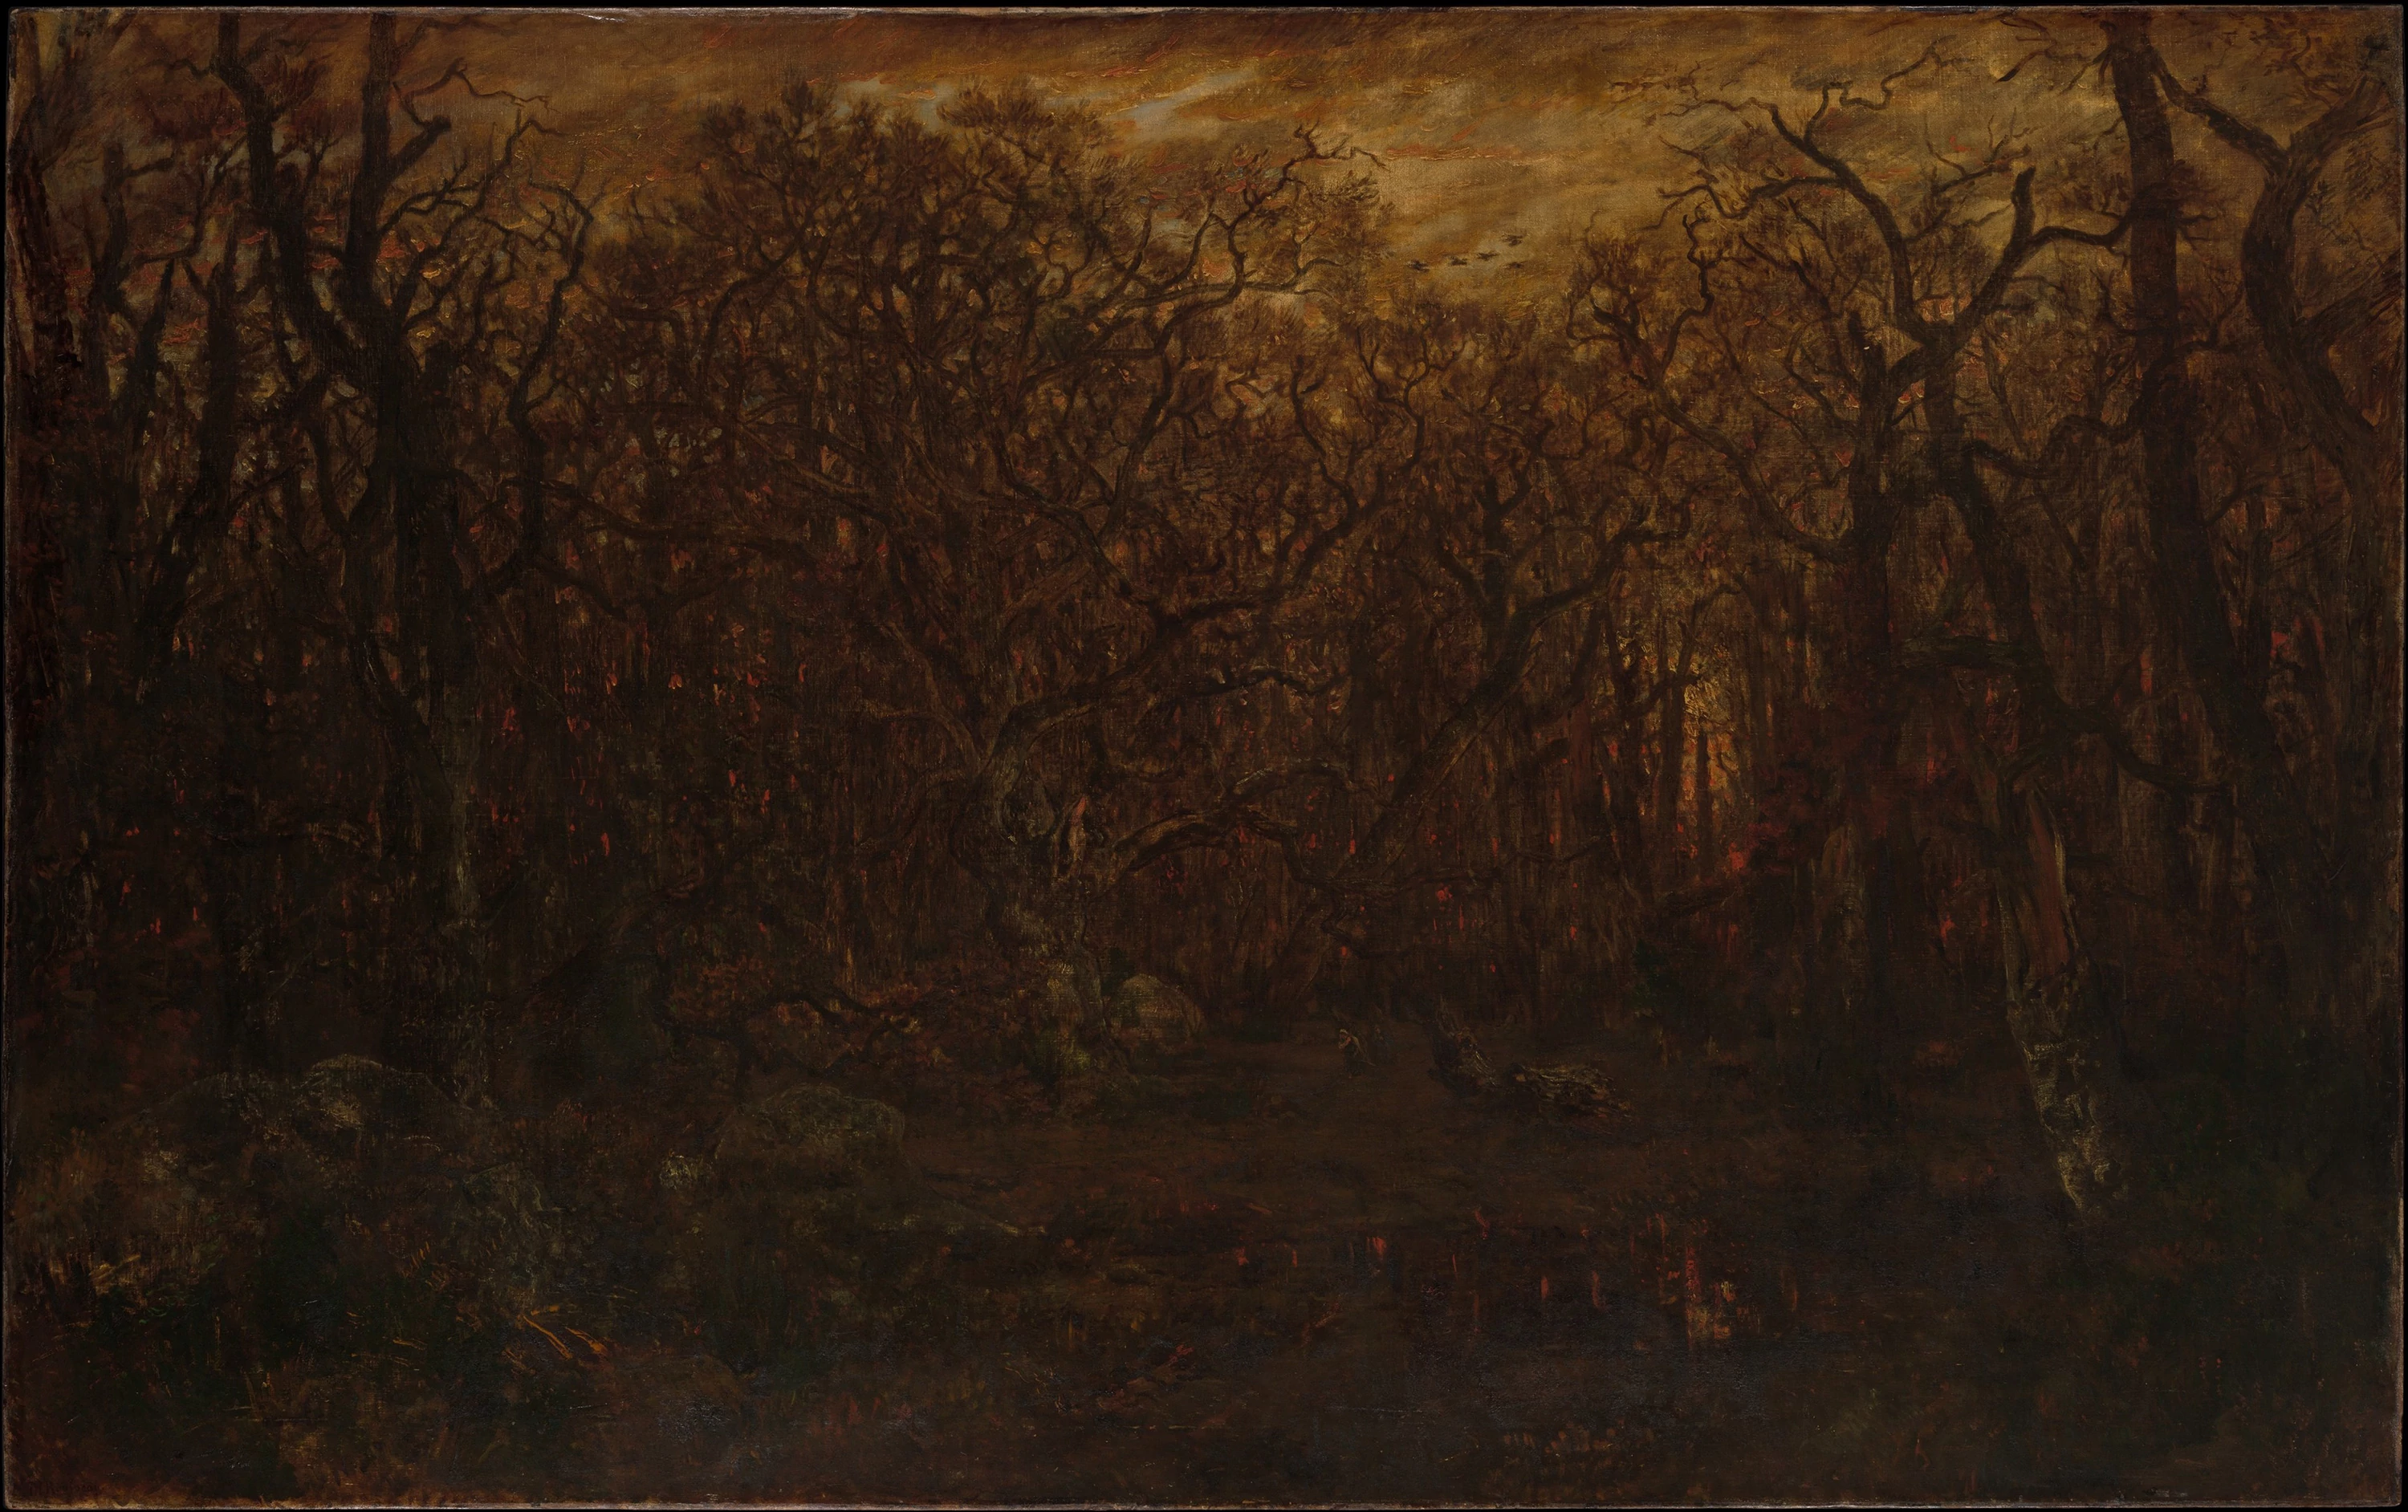 The Forest in Winter at Sunset, Théodore Rousseau